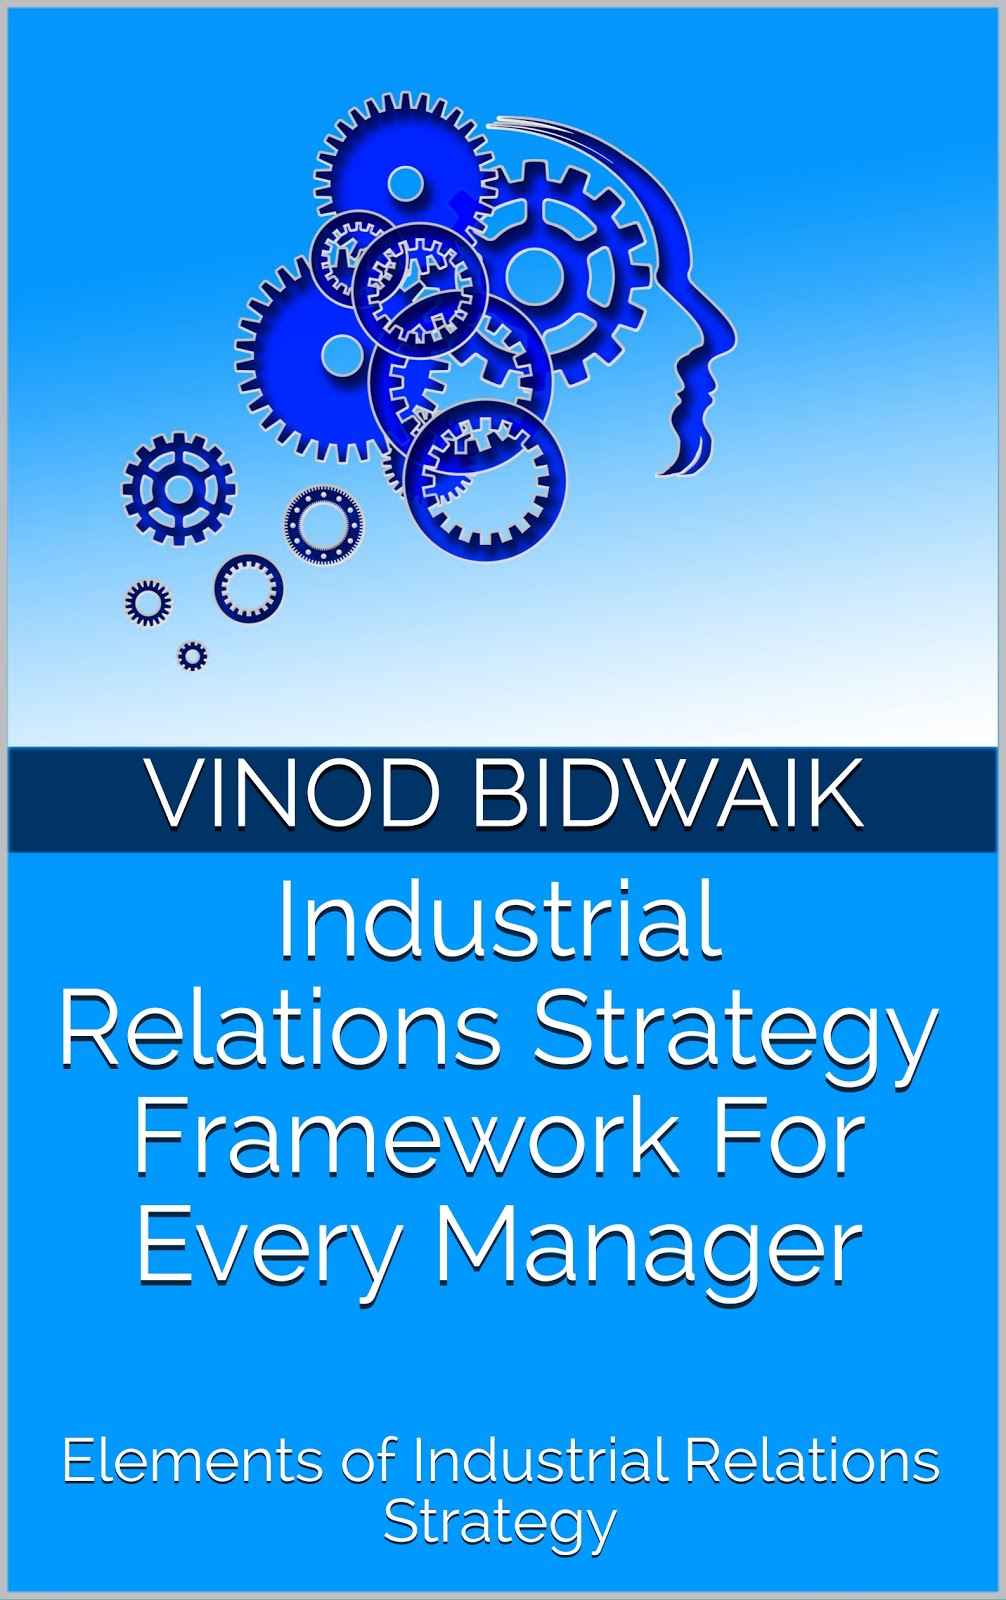 Industrial Relations Strategy Framework For Every Manager